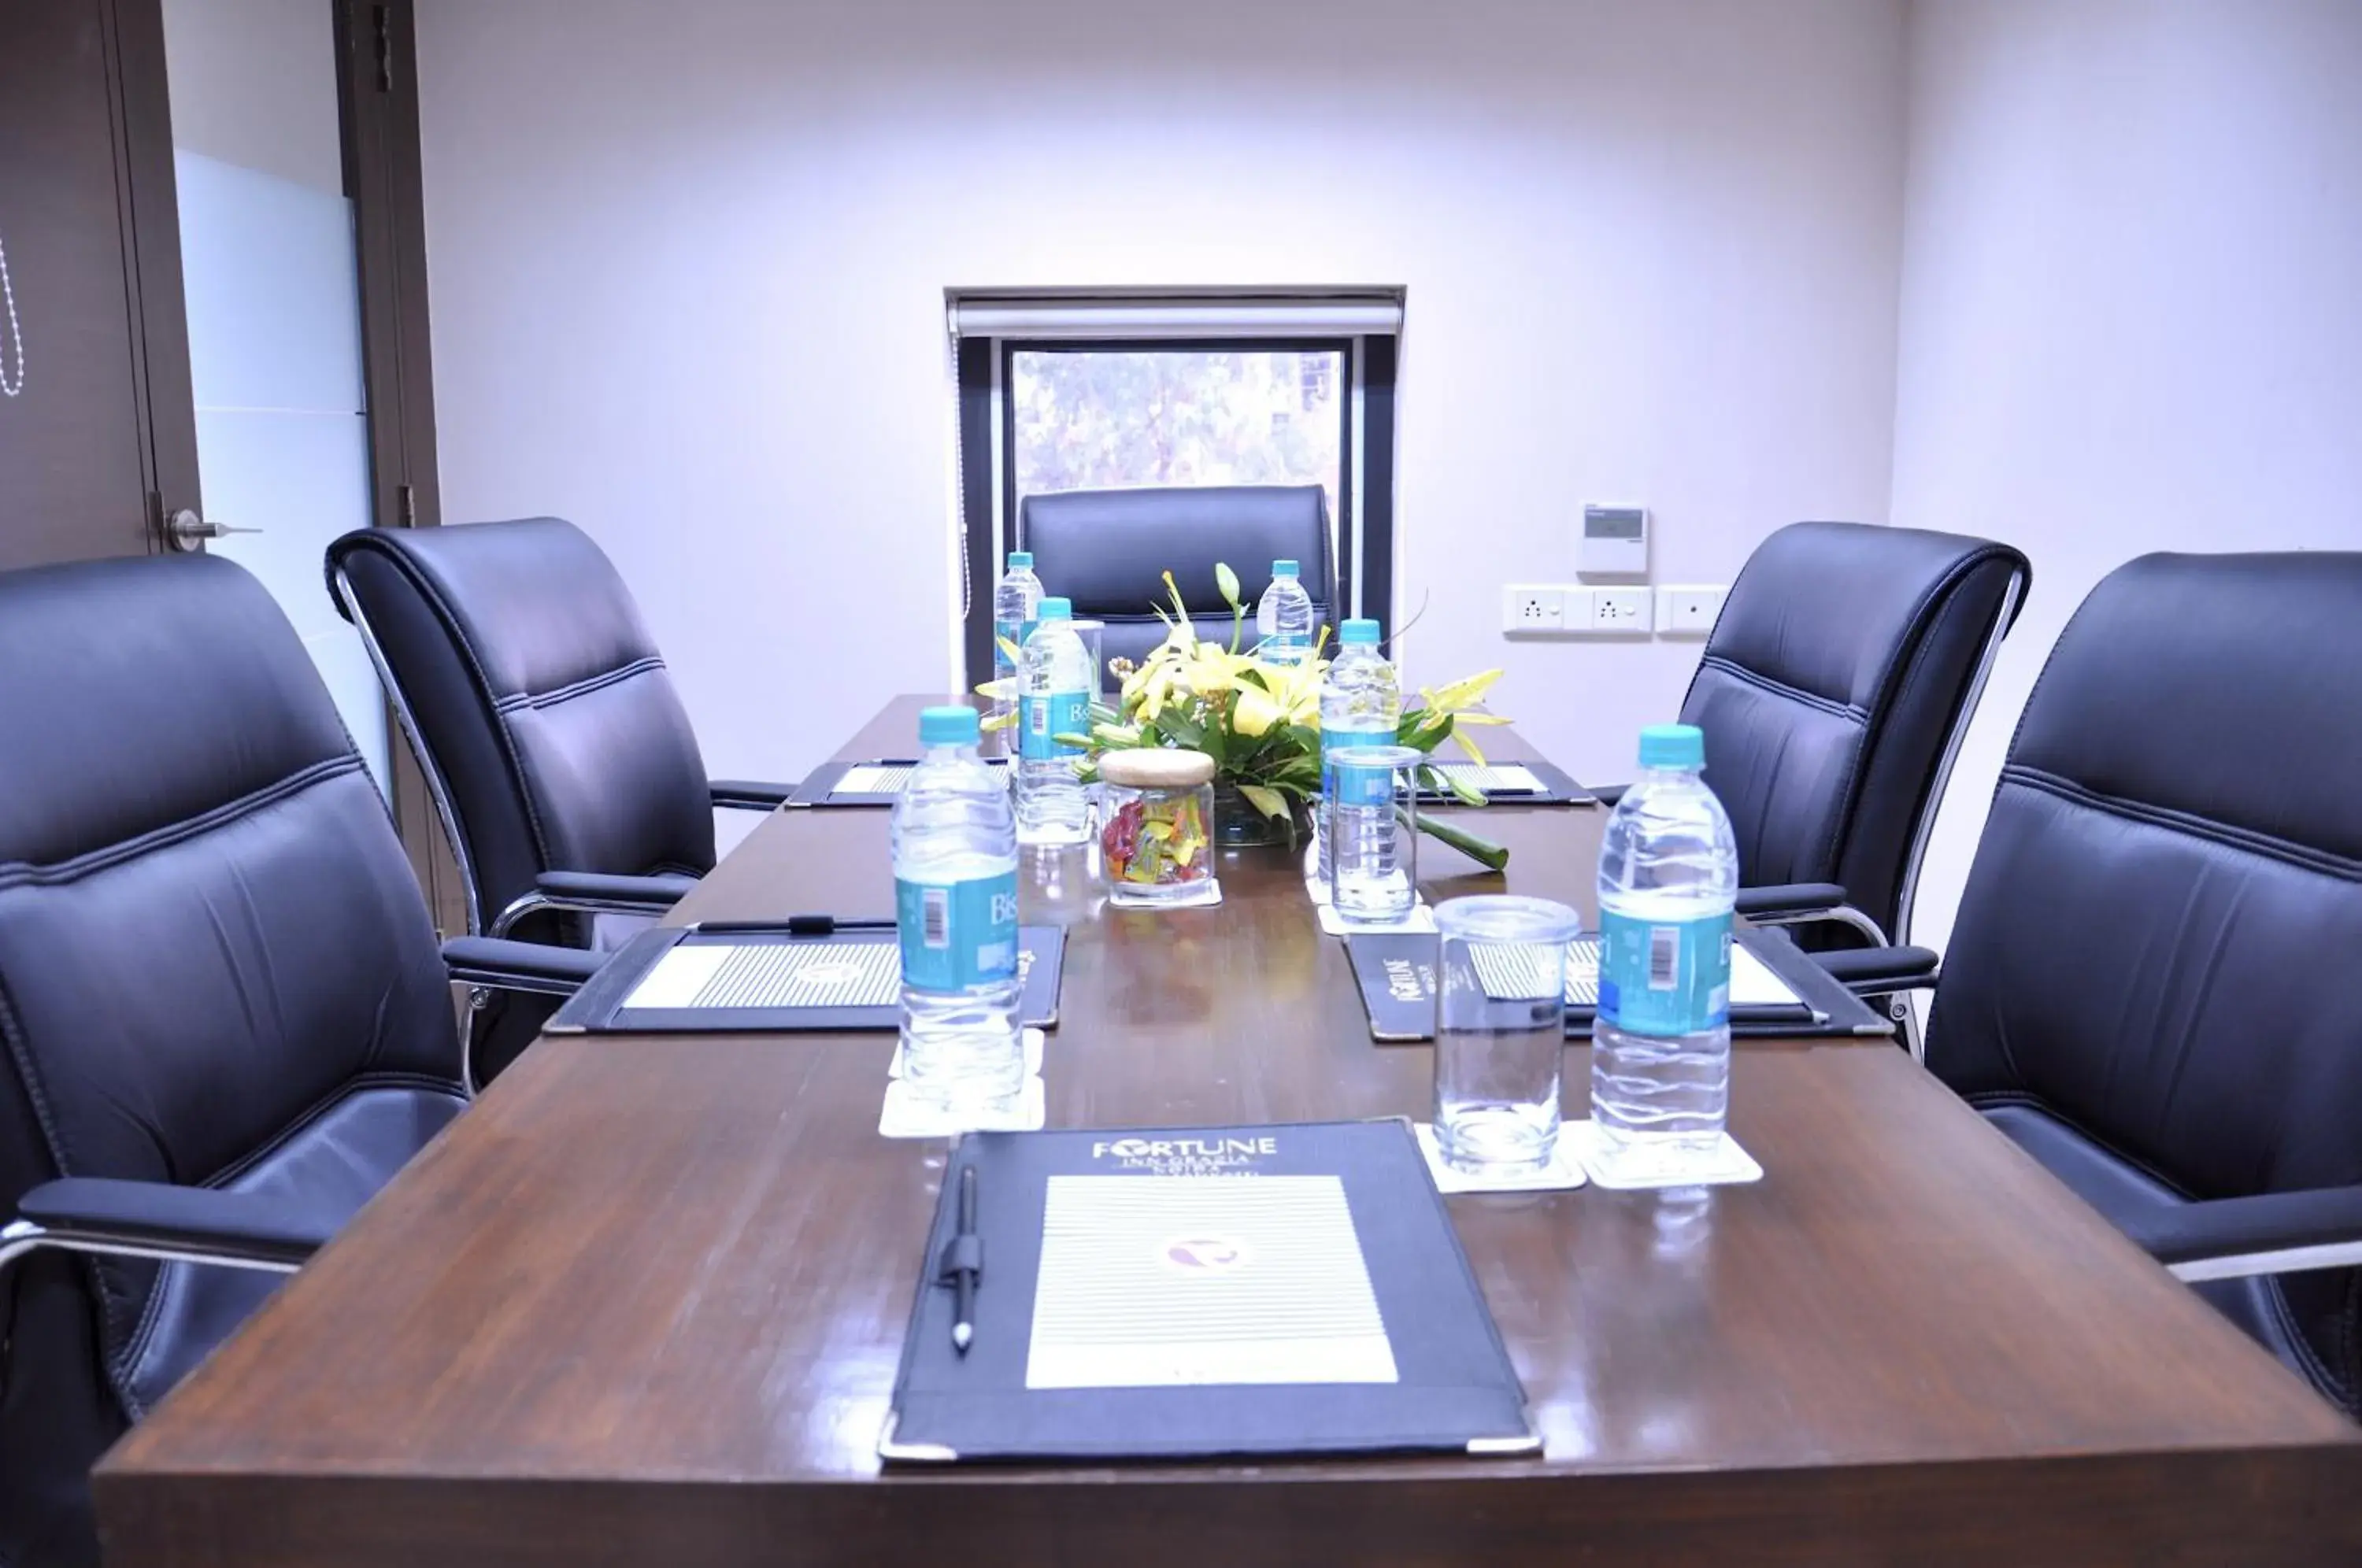 Meeting/conference room, Business Area/Conference Room in Fortune Sector 27 Noida